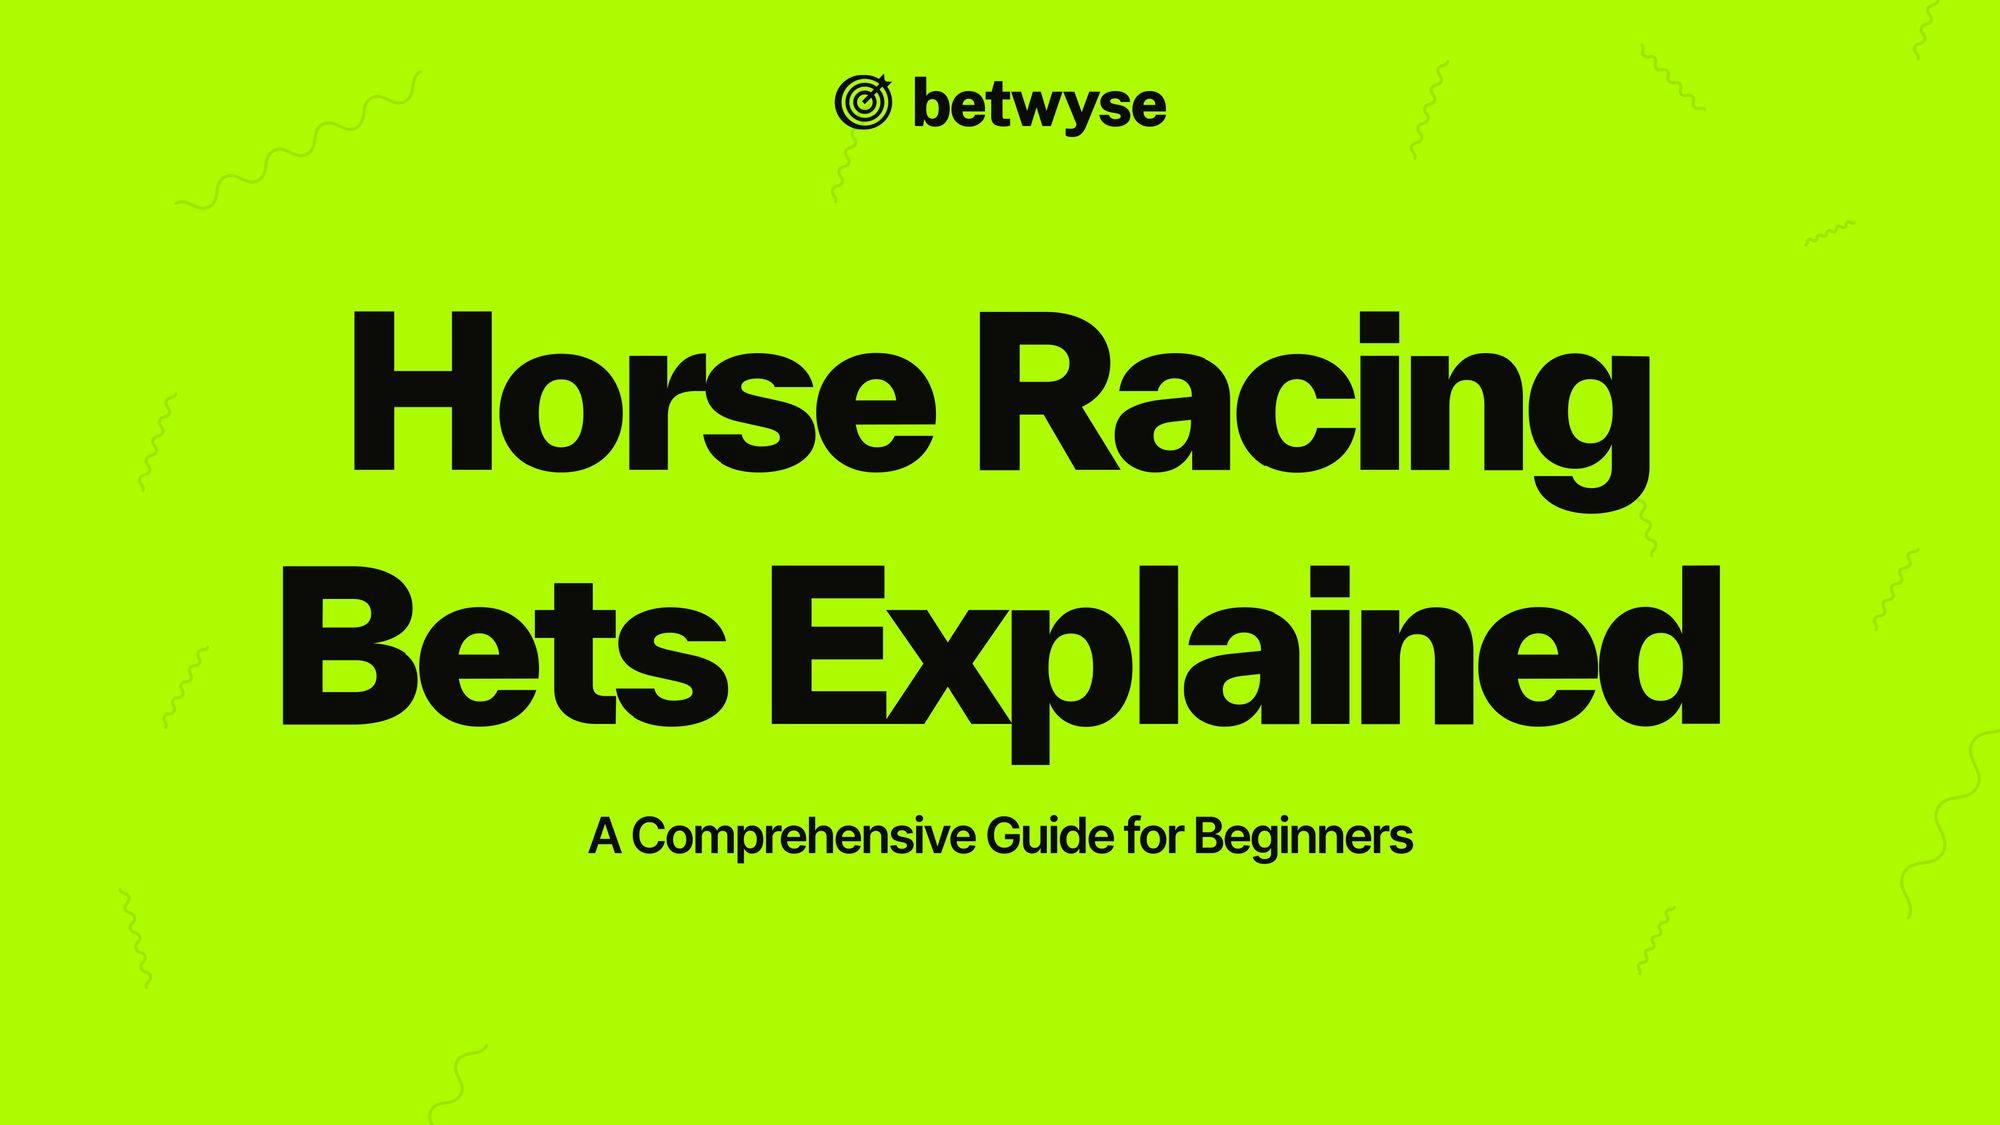 horse racing bets explained image